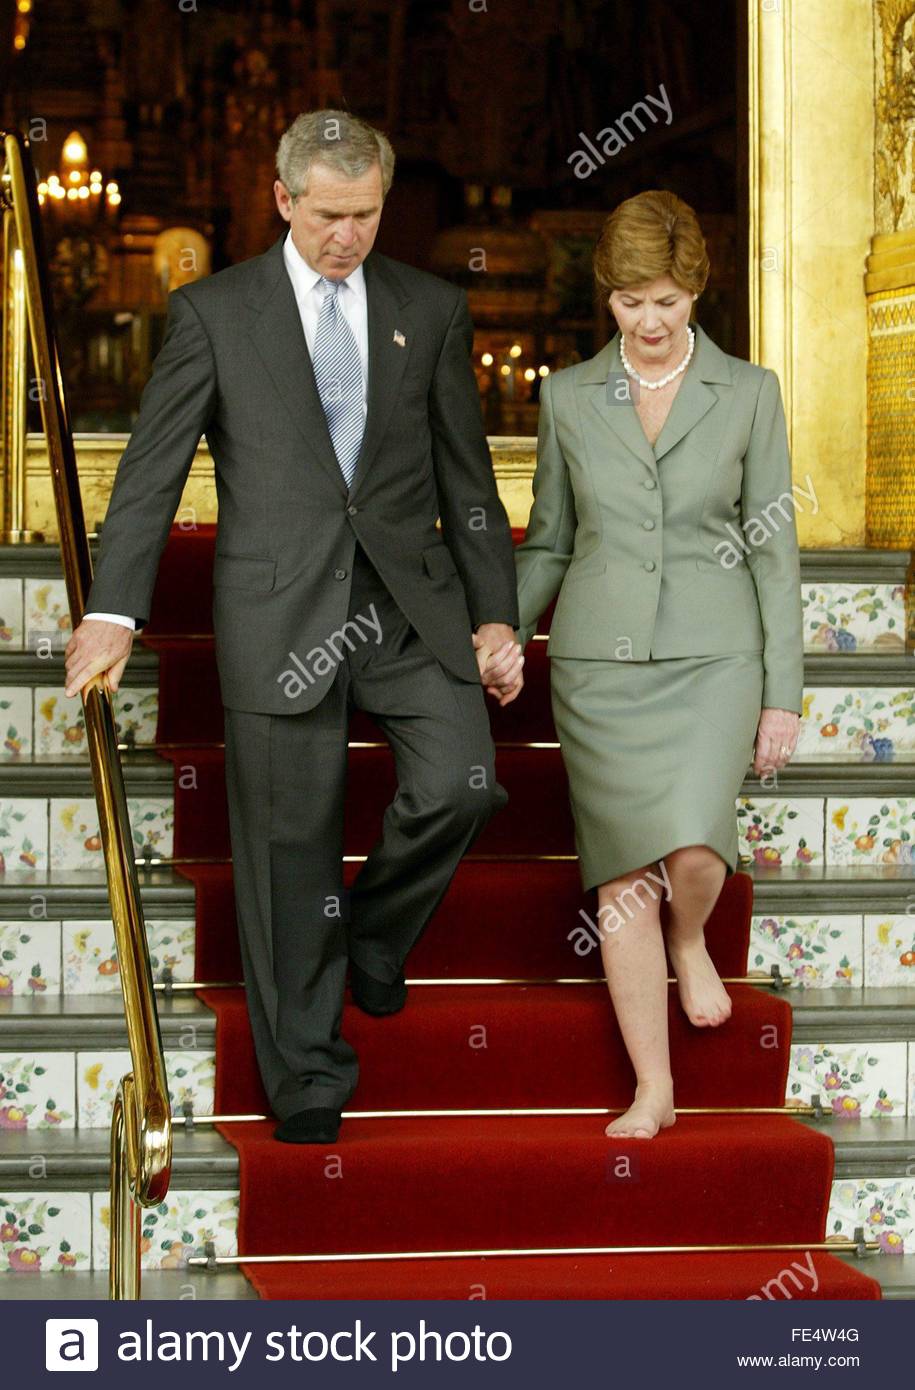 us-president-george-w-bush-and-first-lady-laura-bush-walk-out-of-the-FE4W4G.jpg